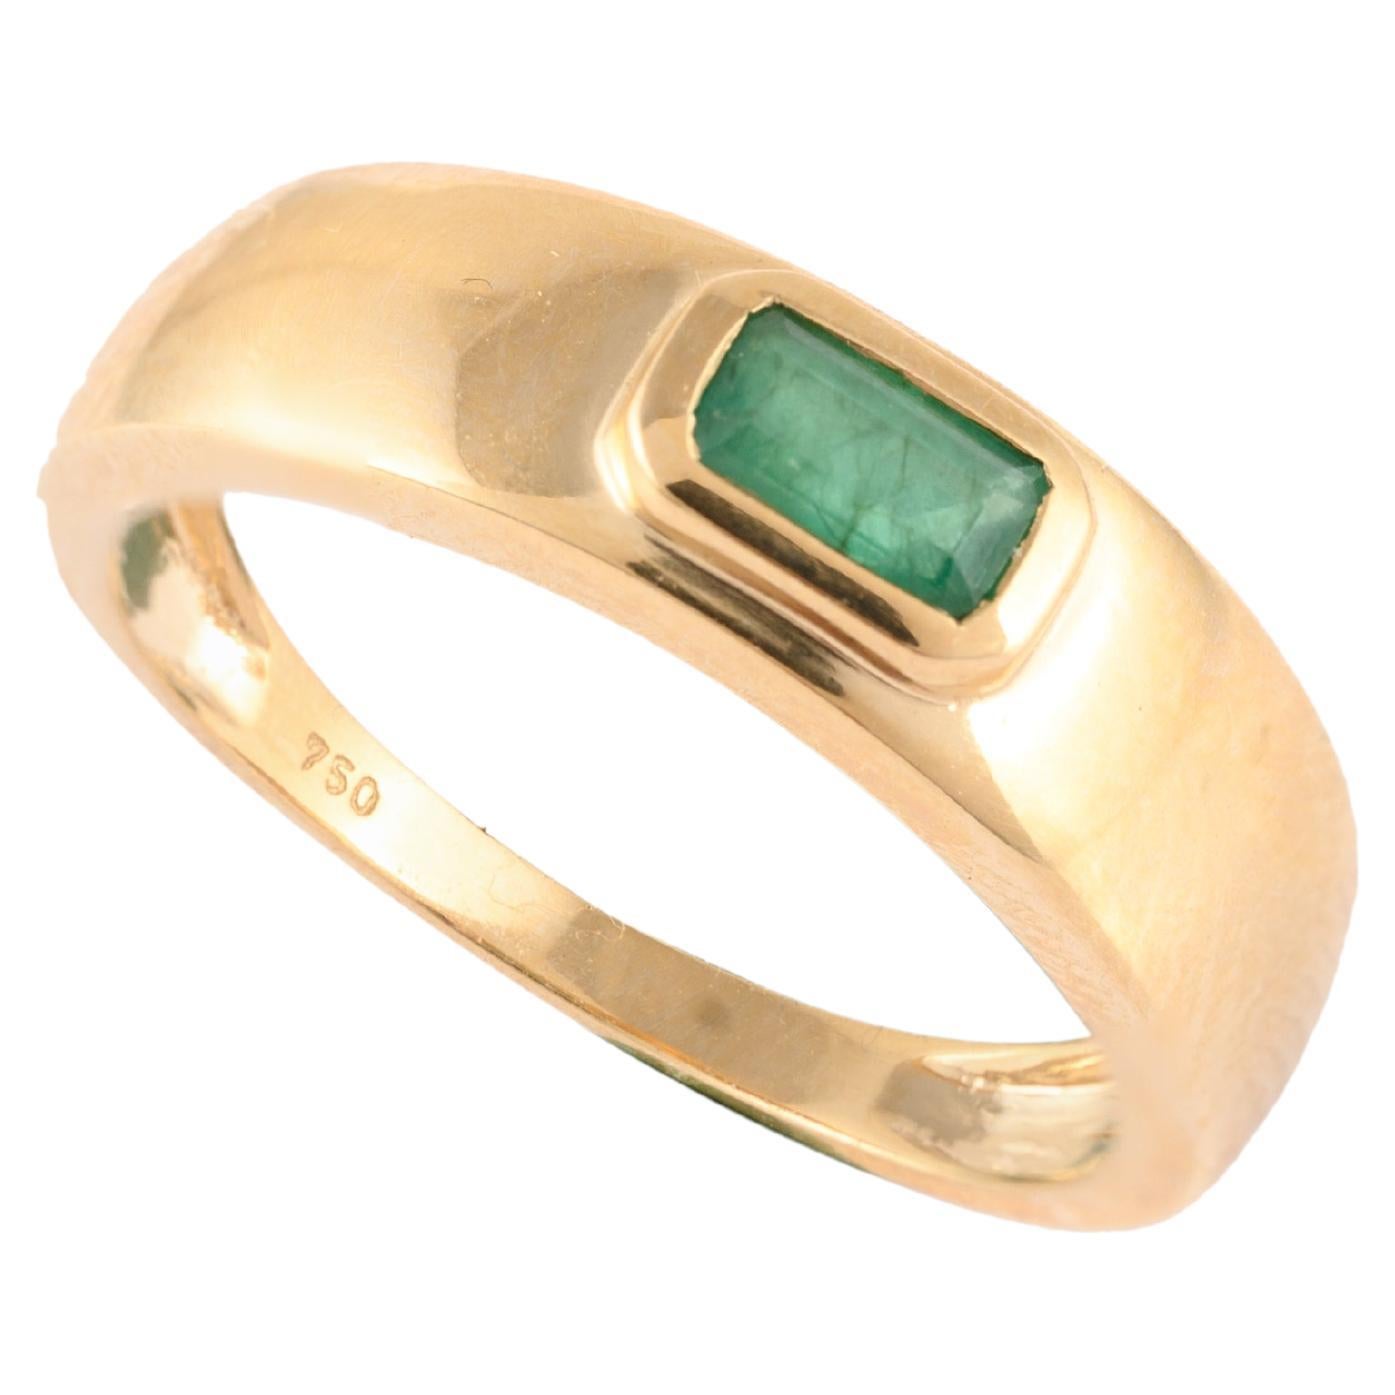 For Sale:  Unisex 18 Karat Solid Yellow Gold Natural Baguette Cut Emerald Ring